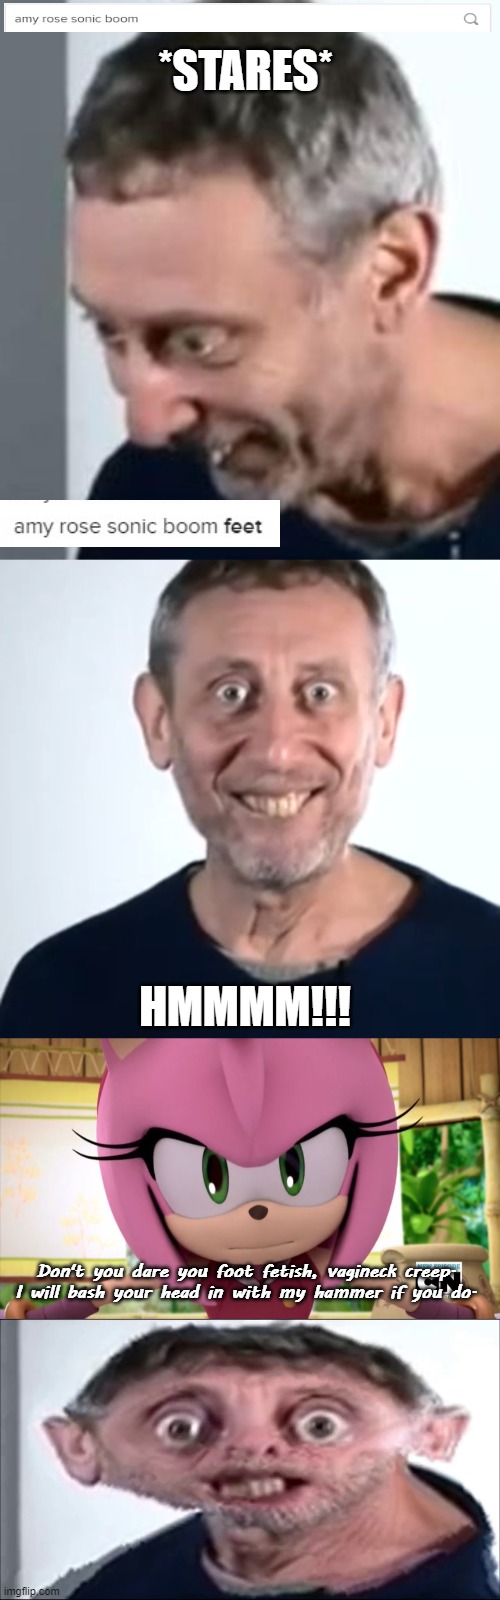 Michael Rosen | *STARES*; HMMMM!!! Don't you dare you foot fetish, vagineck creep. I will bash your head in with my hammer if you do. | image tagged in michael rosen realized hmm,staring,sonic boom | made w/ Imgflip meme maker